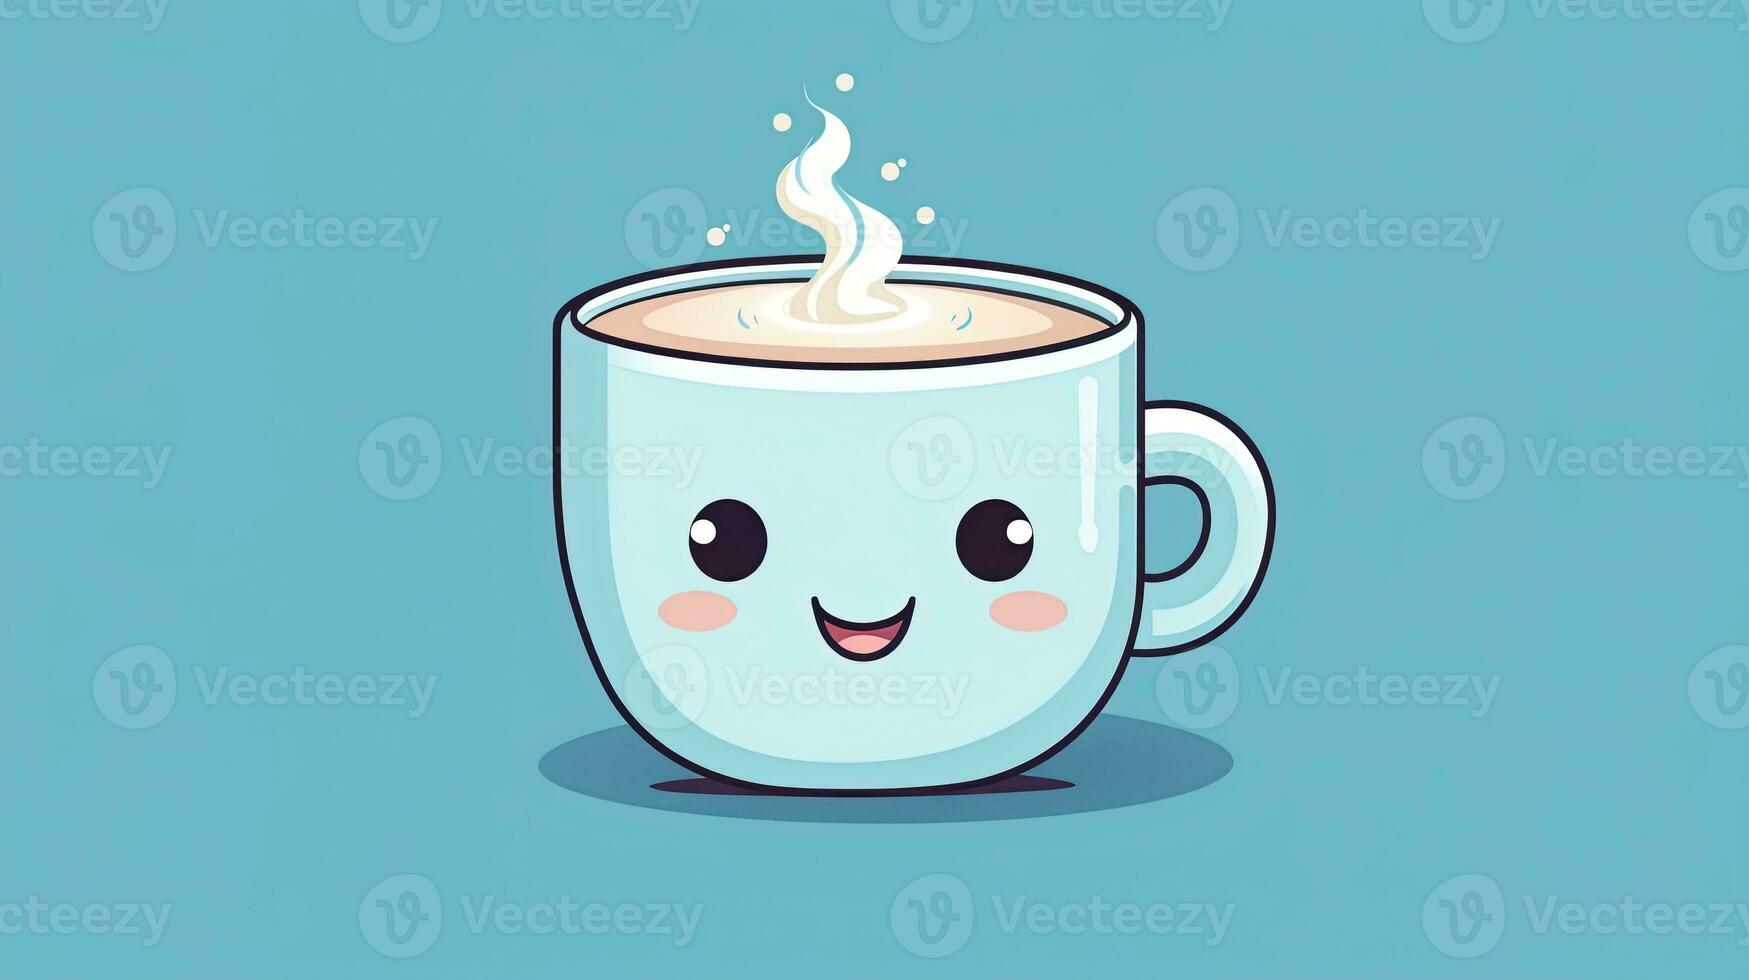 Illustration of Cute Art, Coffee, Coffee Cup, Steam, Cartoon, Adorable Faces photo